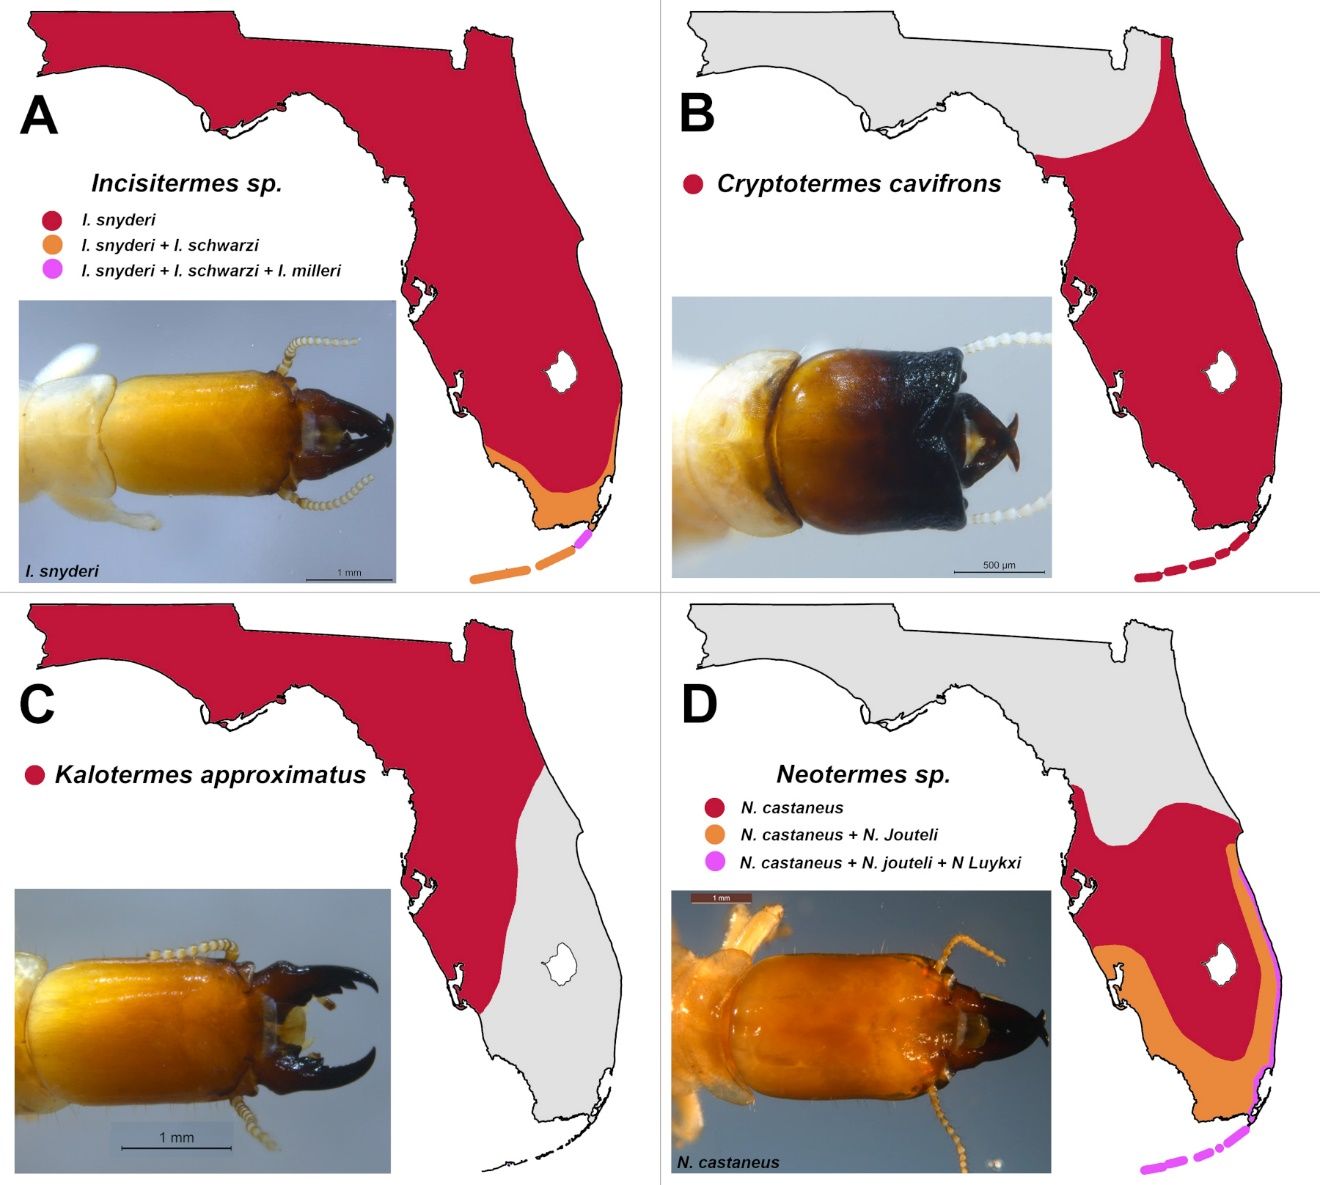 Widely distributed termite species in Florida, but poorly reported, owing to their minor pest status or absence of pest status. 